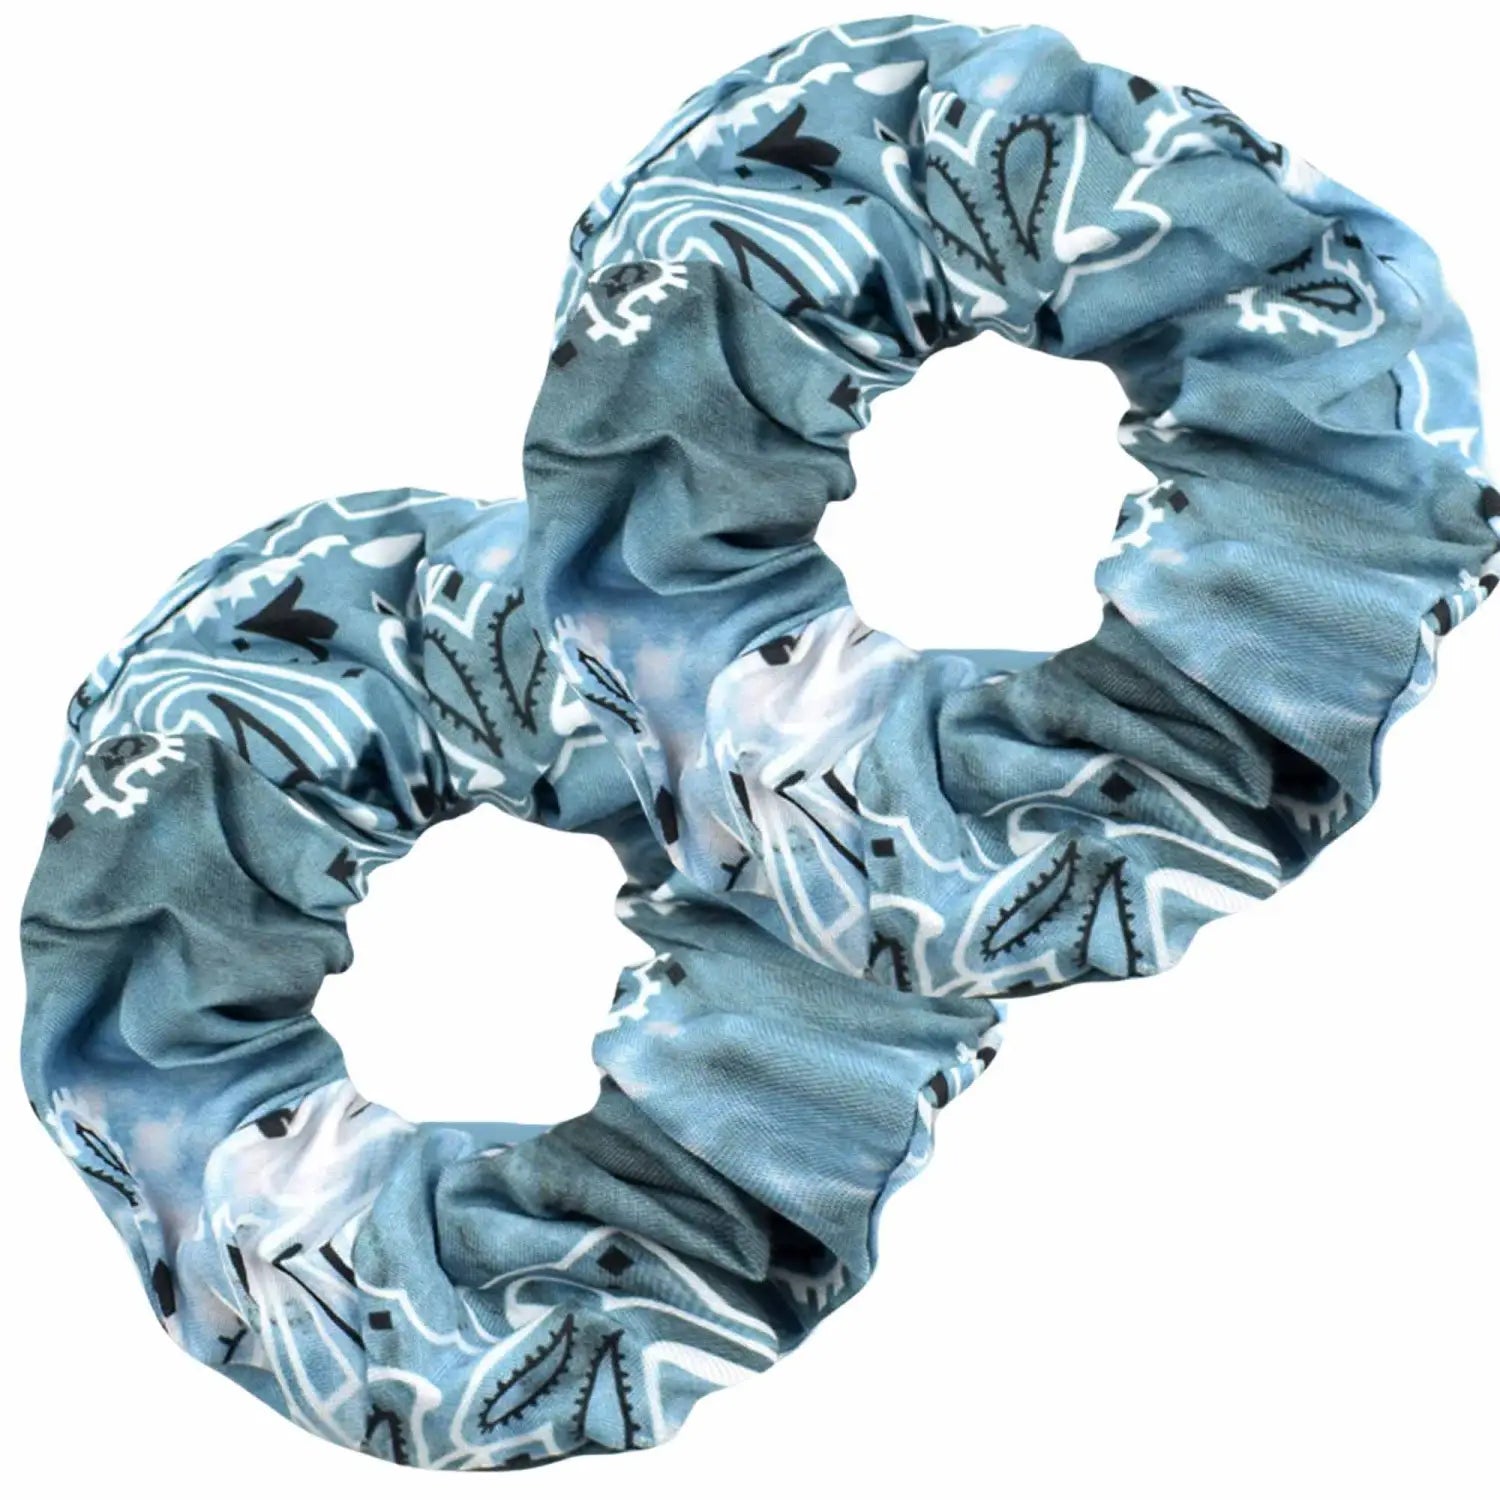 A close-up of a tie dye ombre grey hair scrunchie for women in daily use with black plain casual outfit